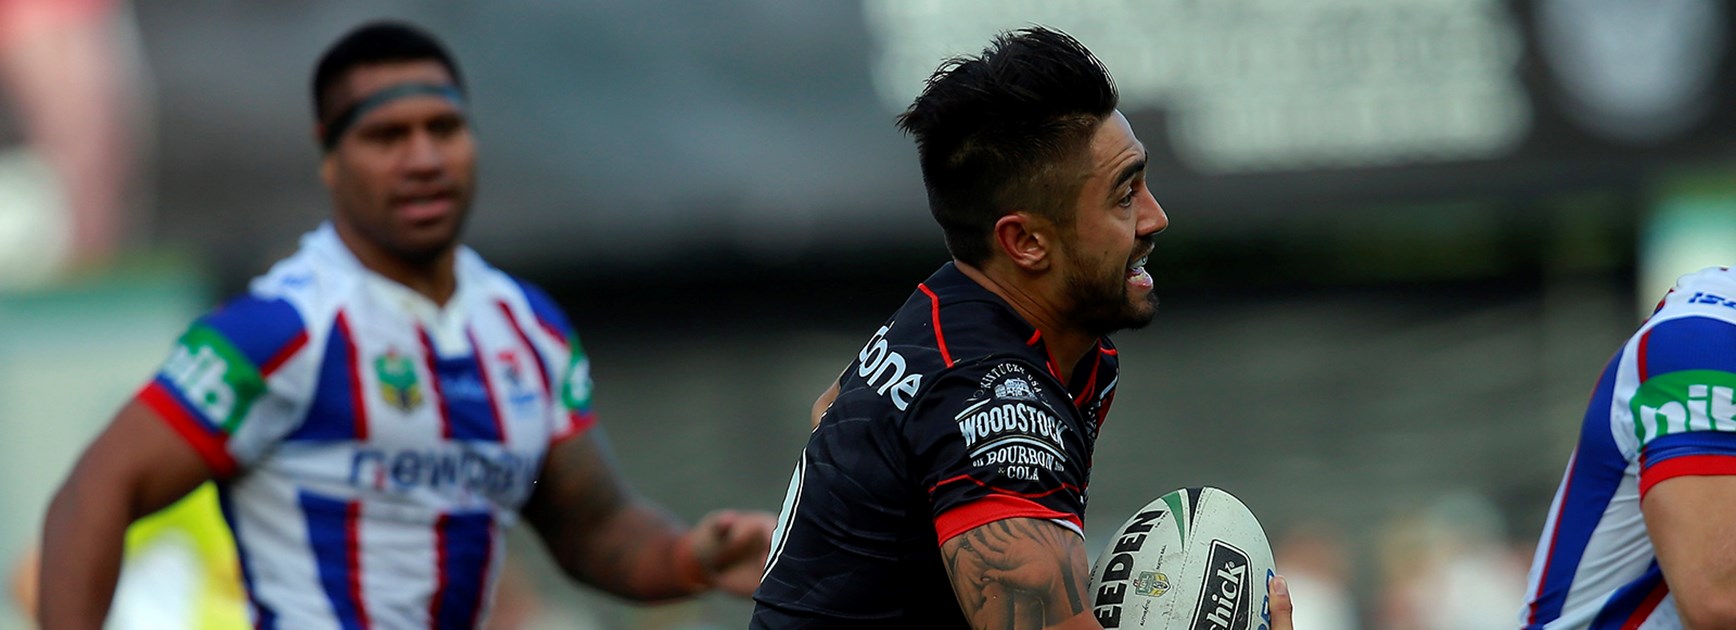 Warriors halfback Shaun Johnson in action against the Knights in Round 4 of the Telstra Premiership.